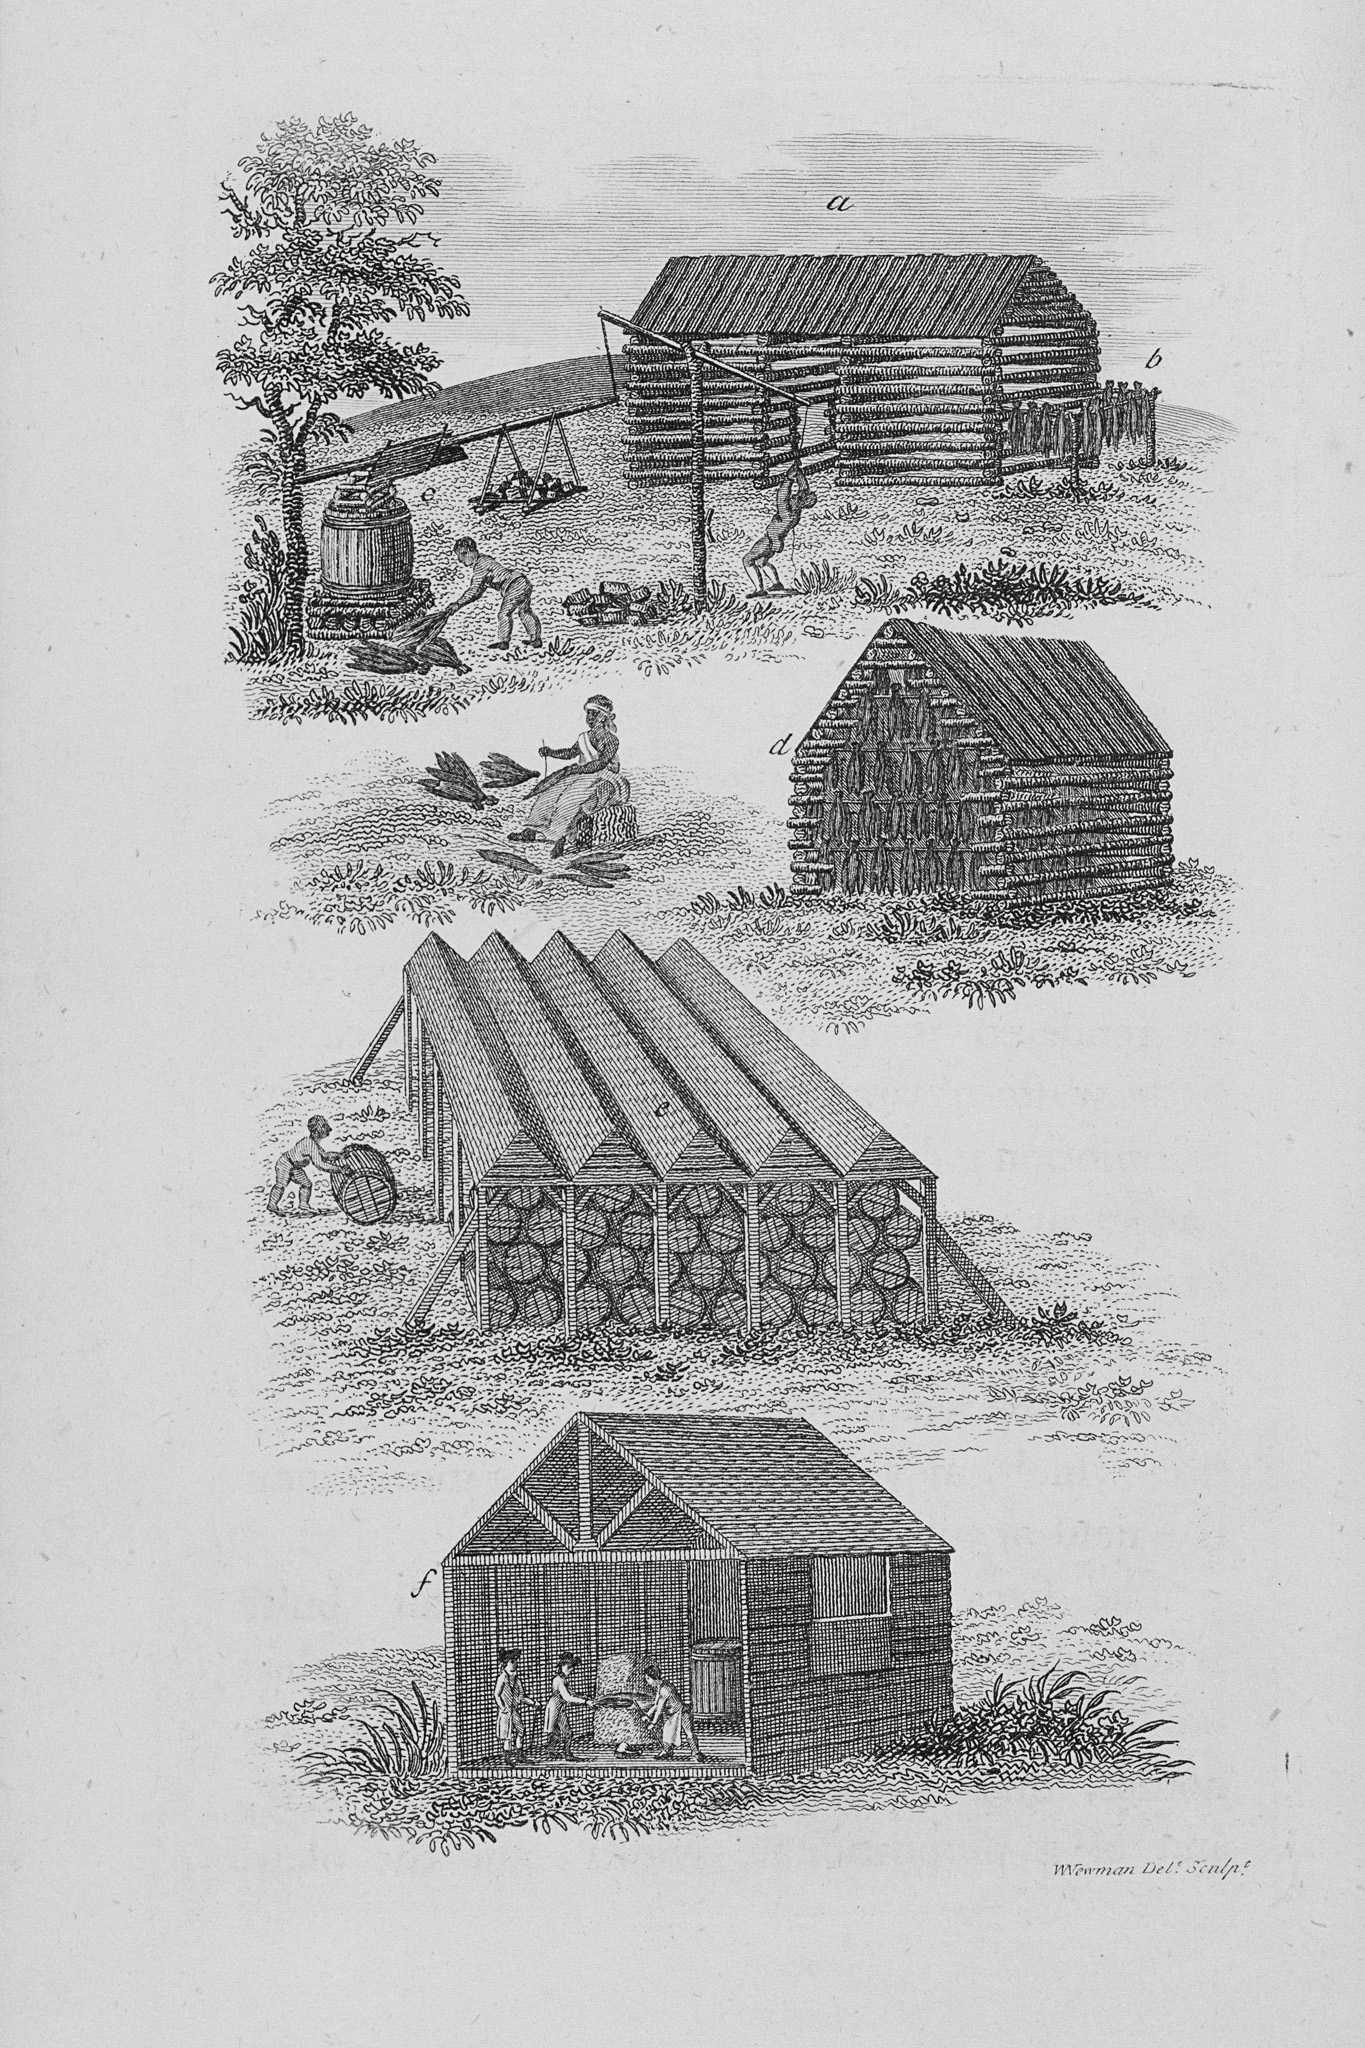 Illustration of The Tobacco House